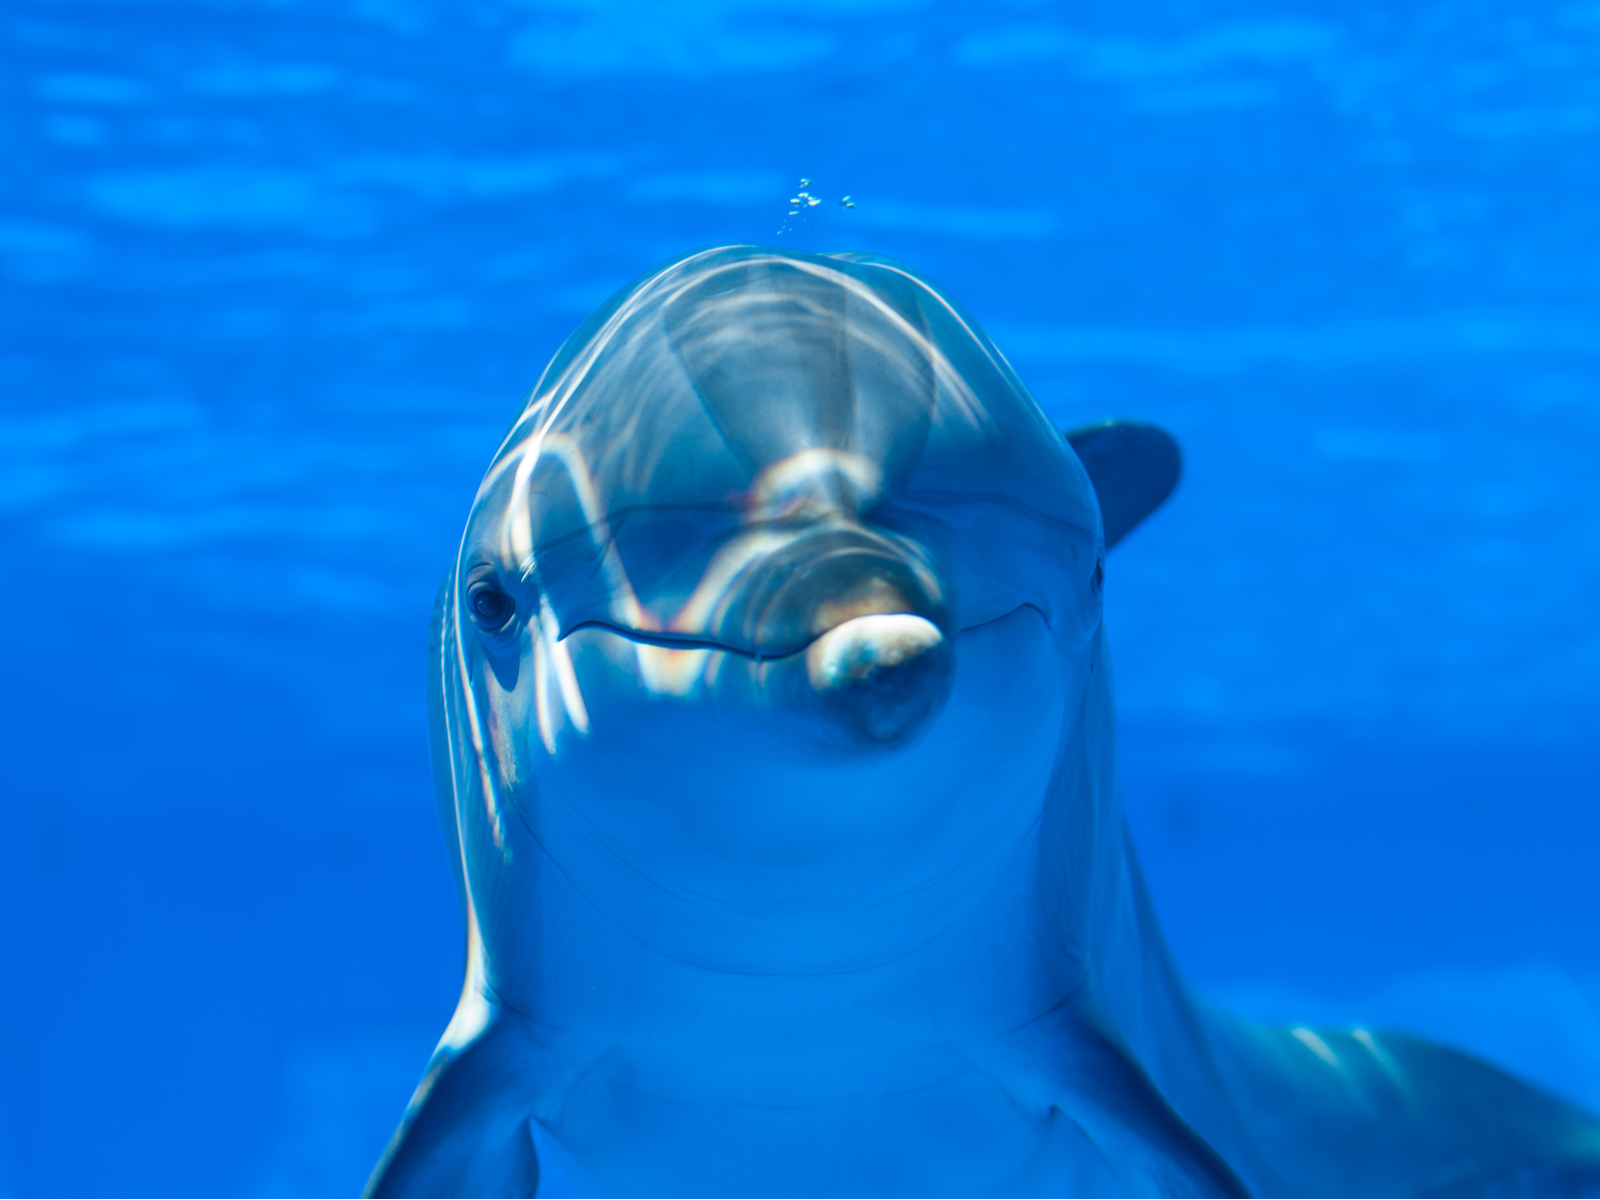 A Dolphin with a friendly face directly looking at the camera inside one of the best aquariums in the US